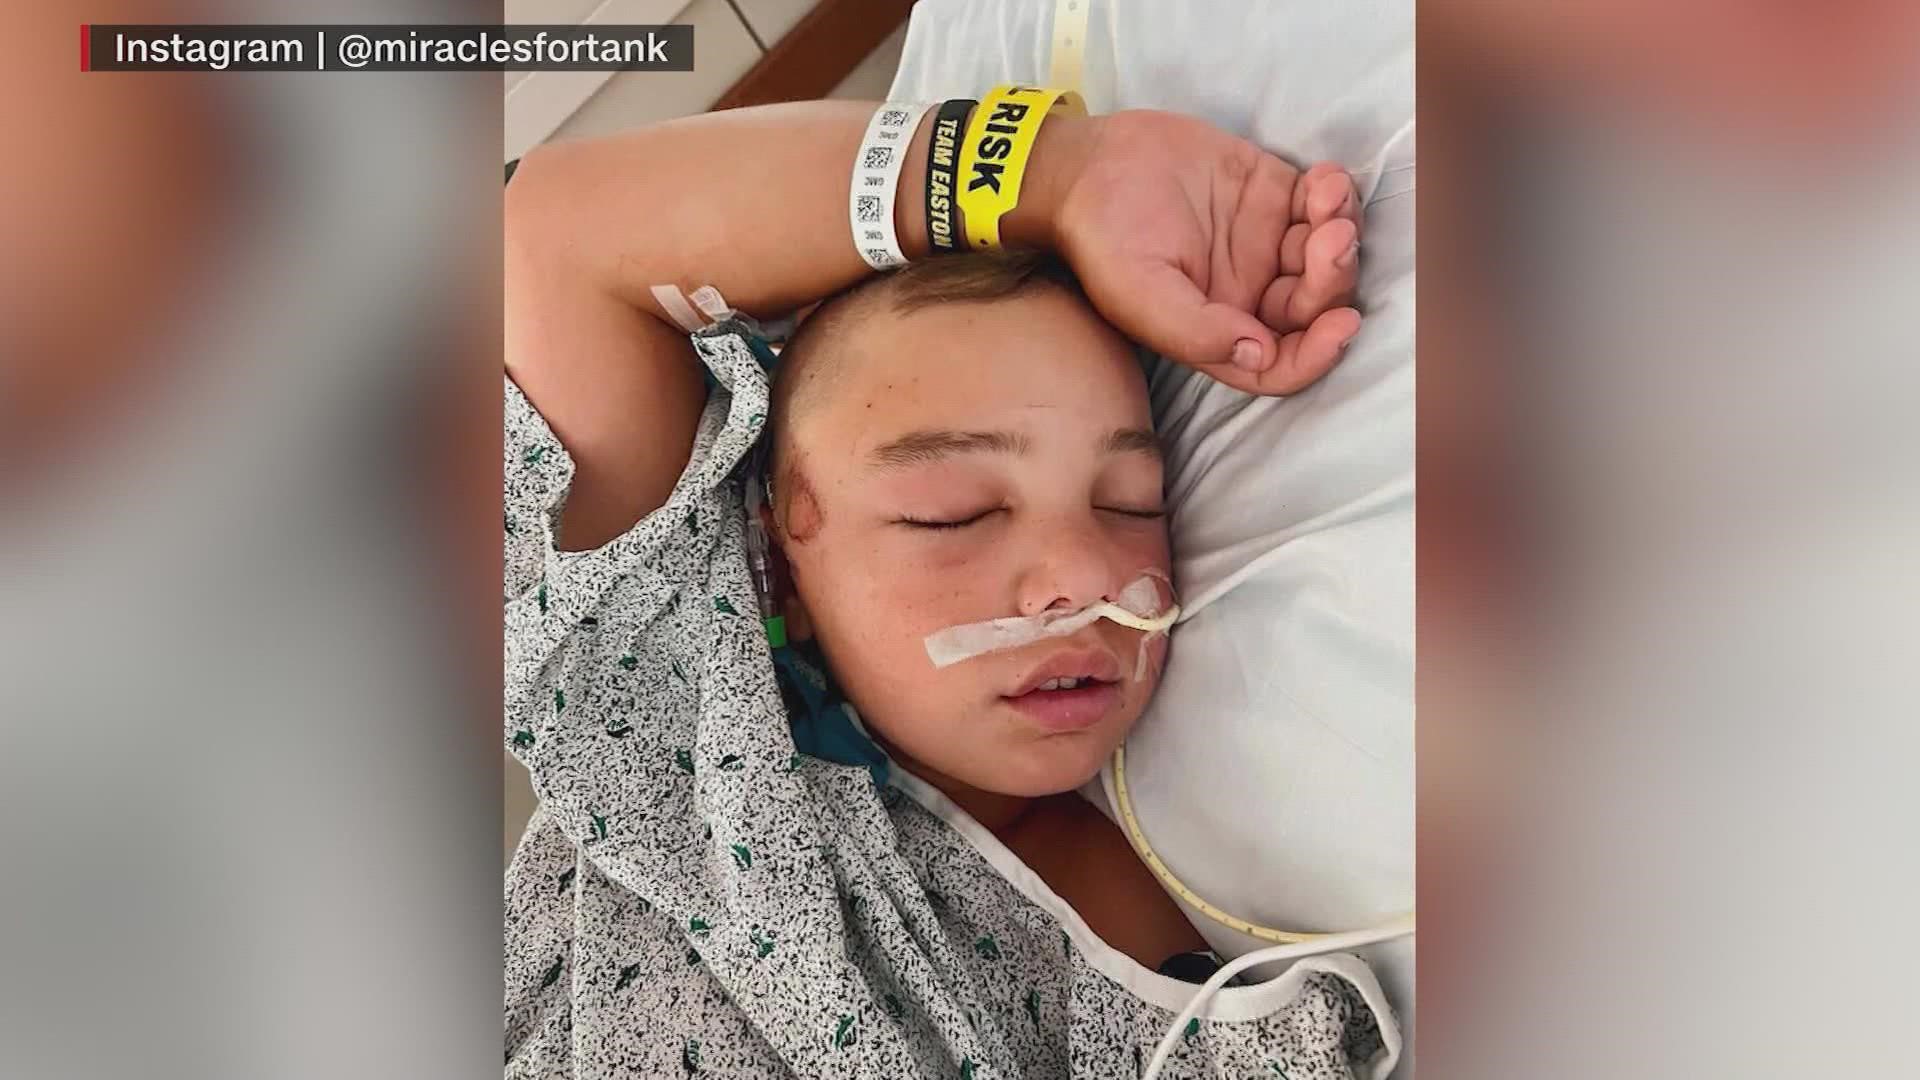 The accident happened at the Little League World Series. Fortunately, Easton is recovering now.